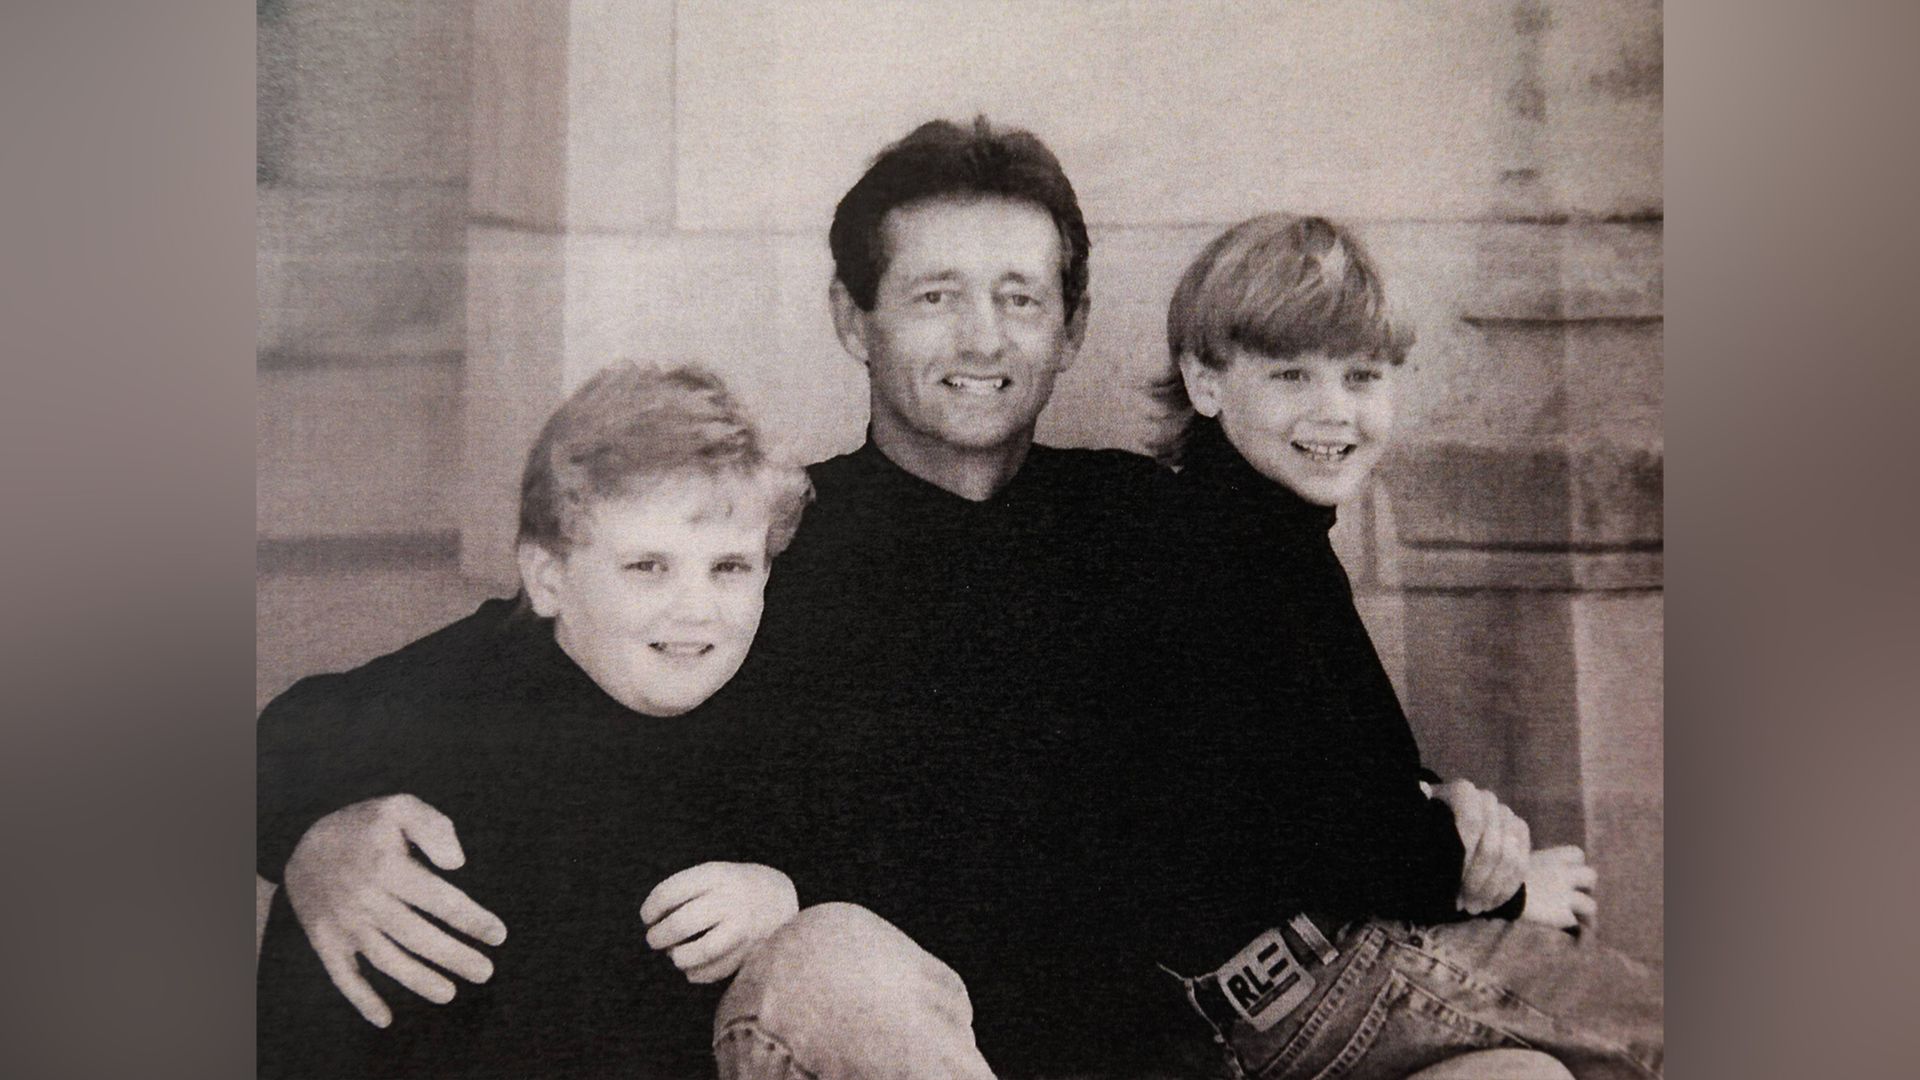 Hunter Doohan with his brother and father